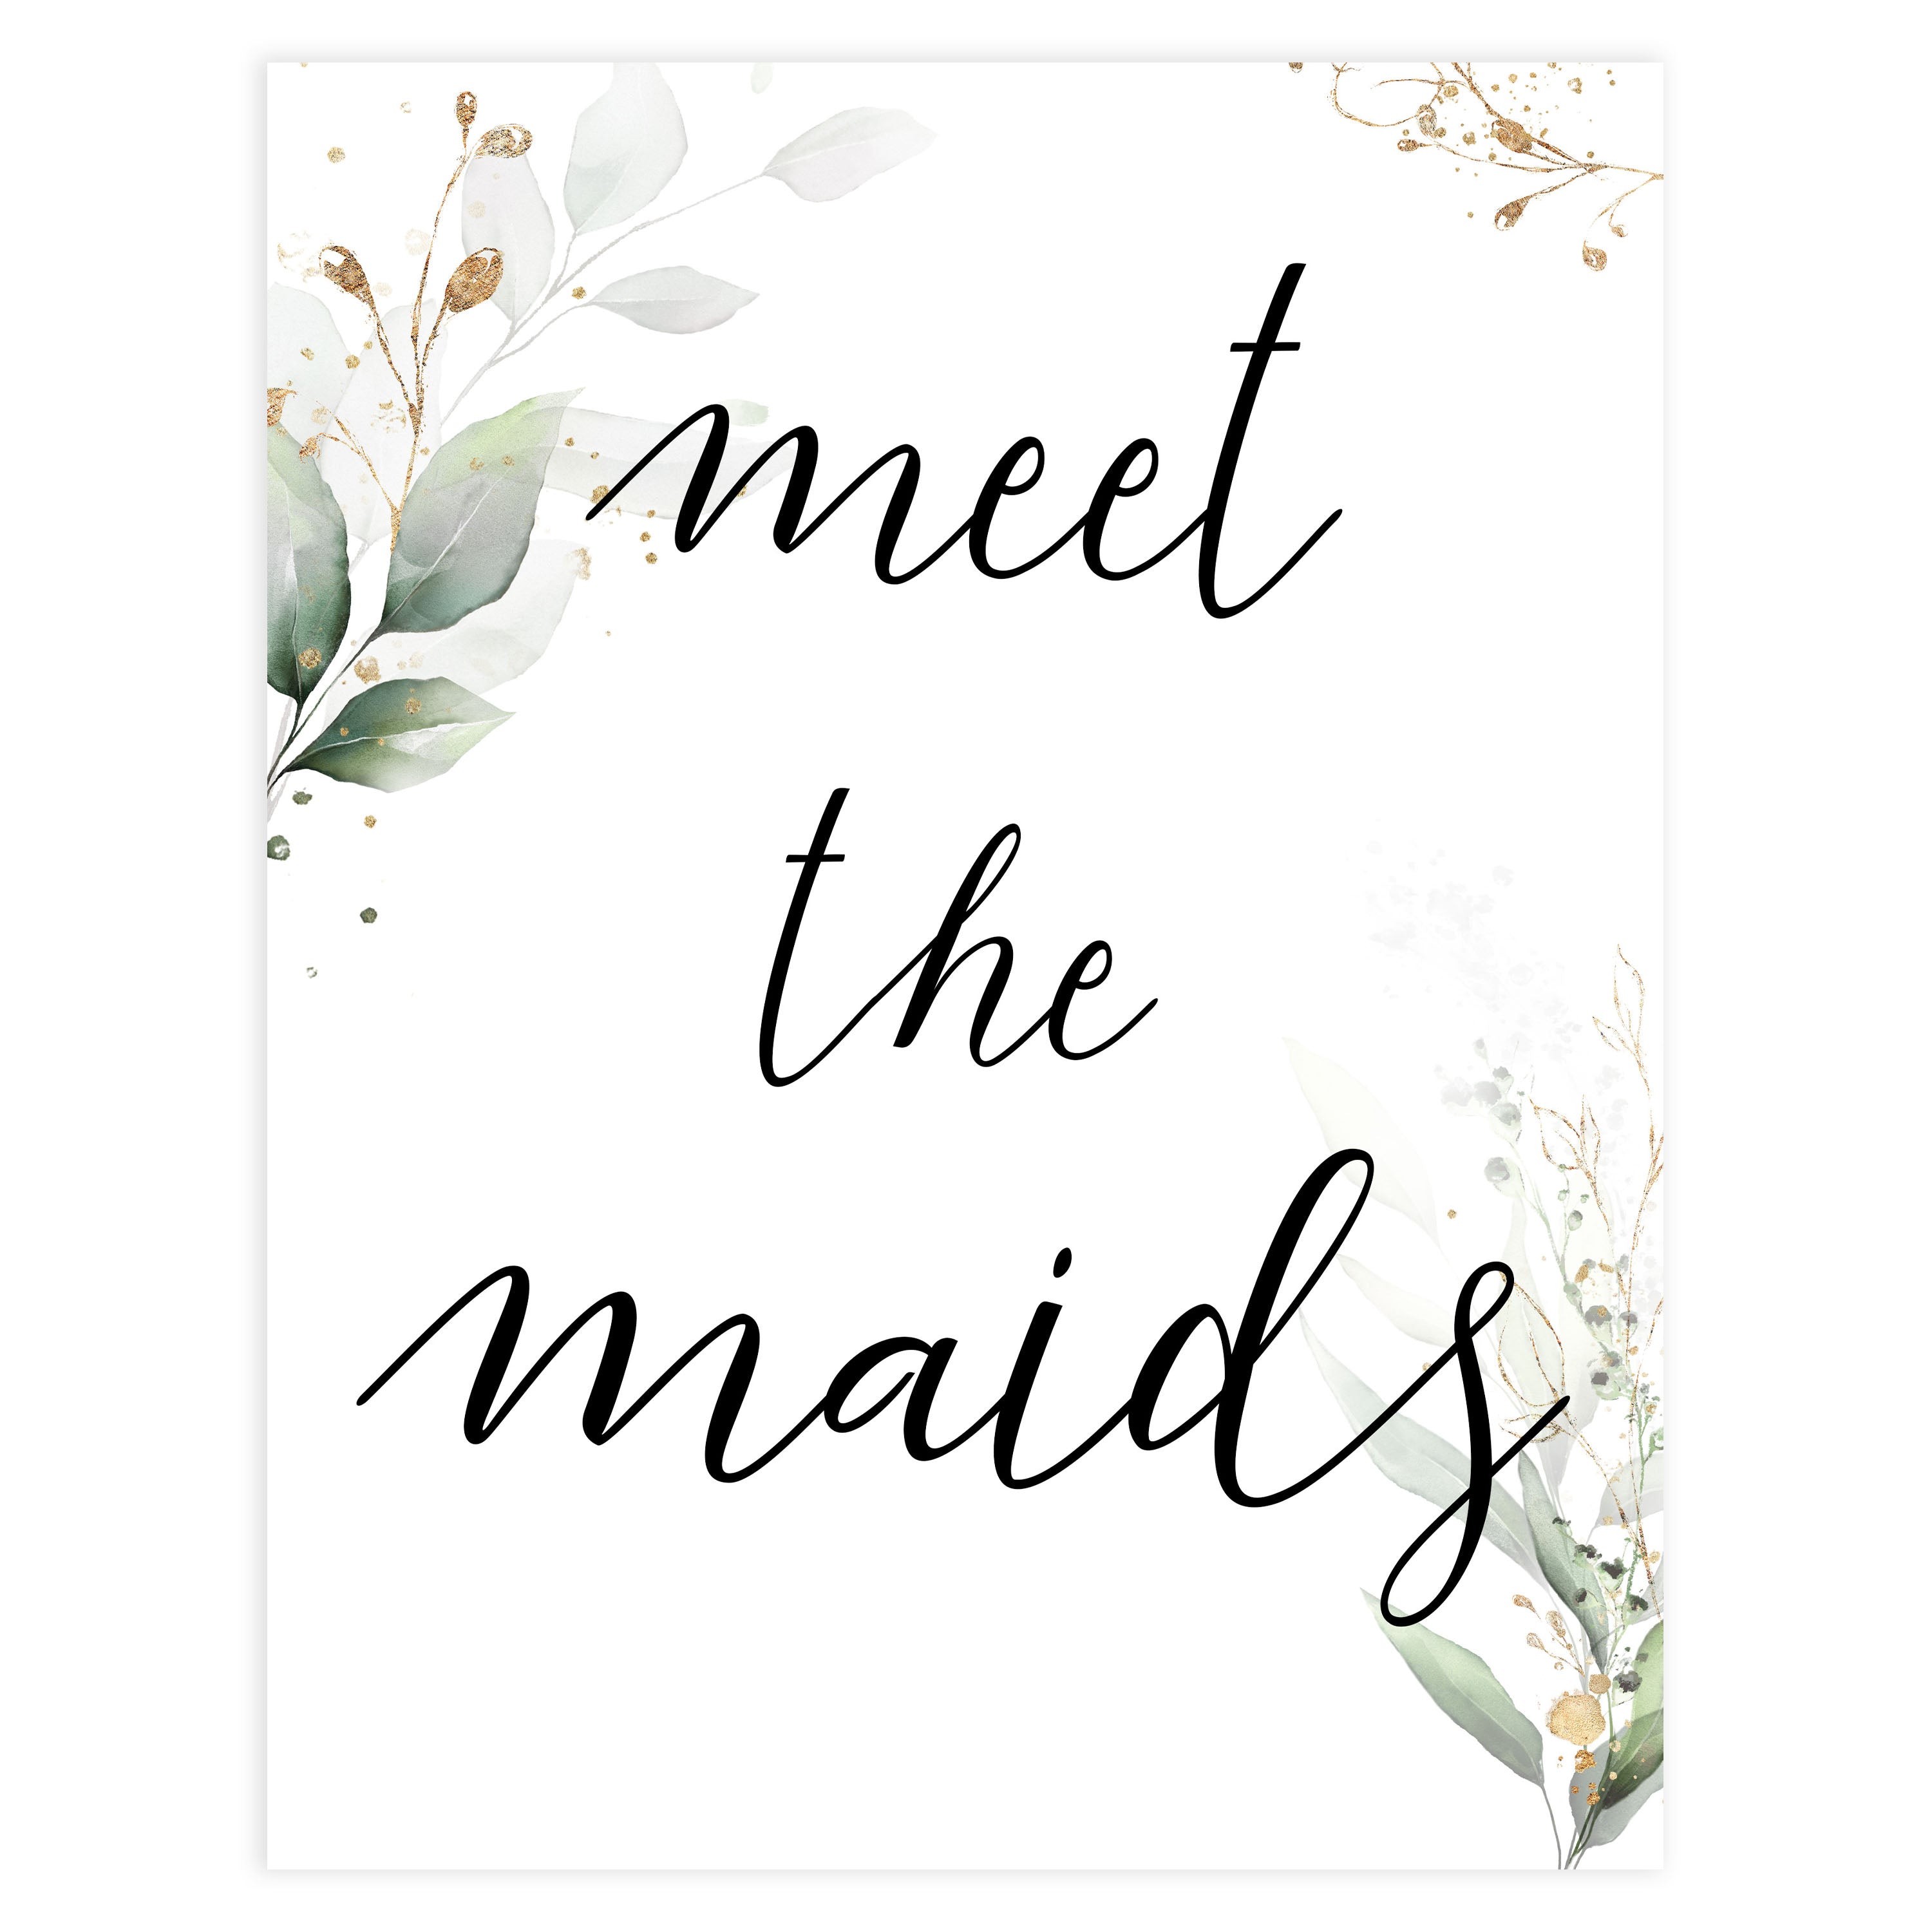 meet the maids sign, Printable bridal shower signs, greenery bridal shower decor, gold leaf bridal shower decor ideas, fun bridal shower decor, bridal shower game ideas, greenery bridal shower ideas